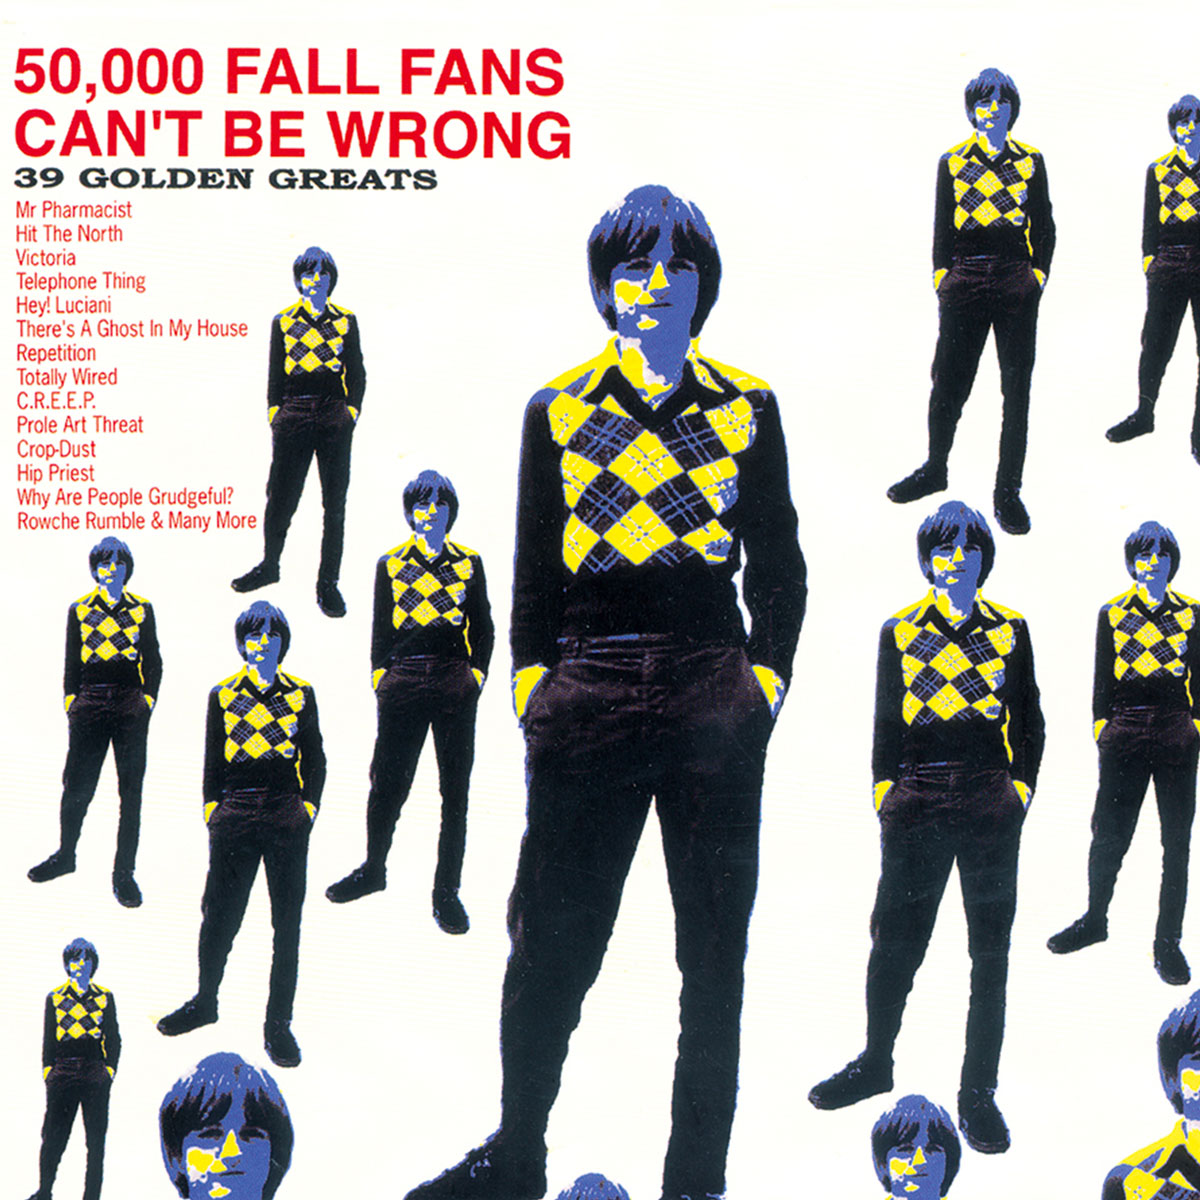 The album cover for The Fall’s 2004 greatest hits album titled “50,000 Fall Fans Can’t Be Wrong: 39 Golden Greats.”